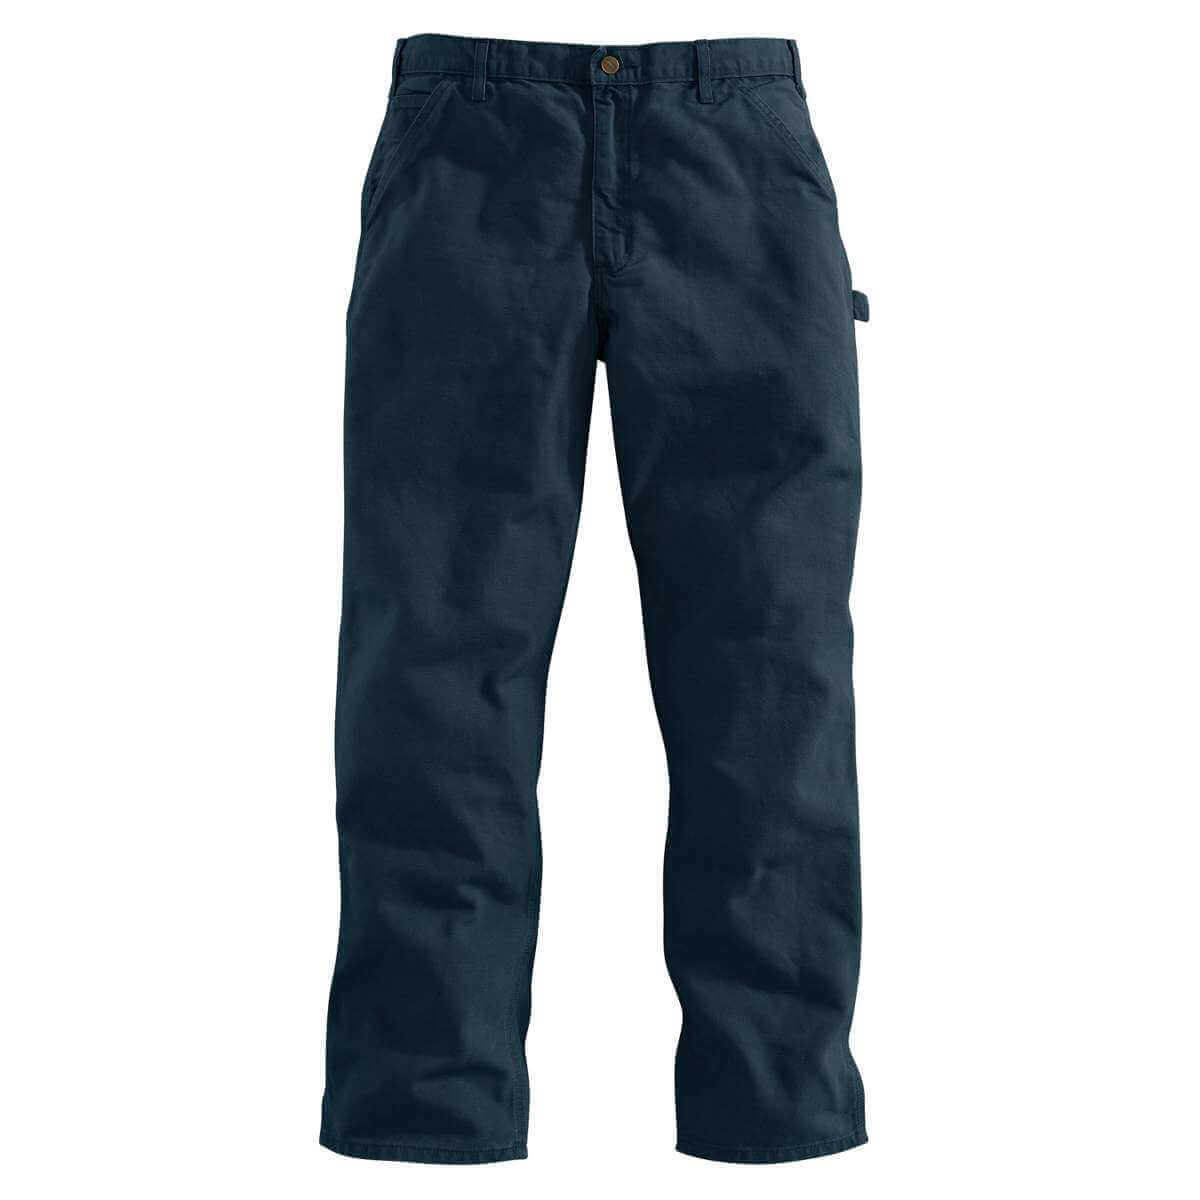 Carhartt Men's Loose Fit Washed Duck Utility Work Pant MDT Midnight